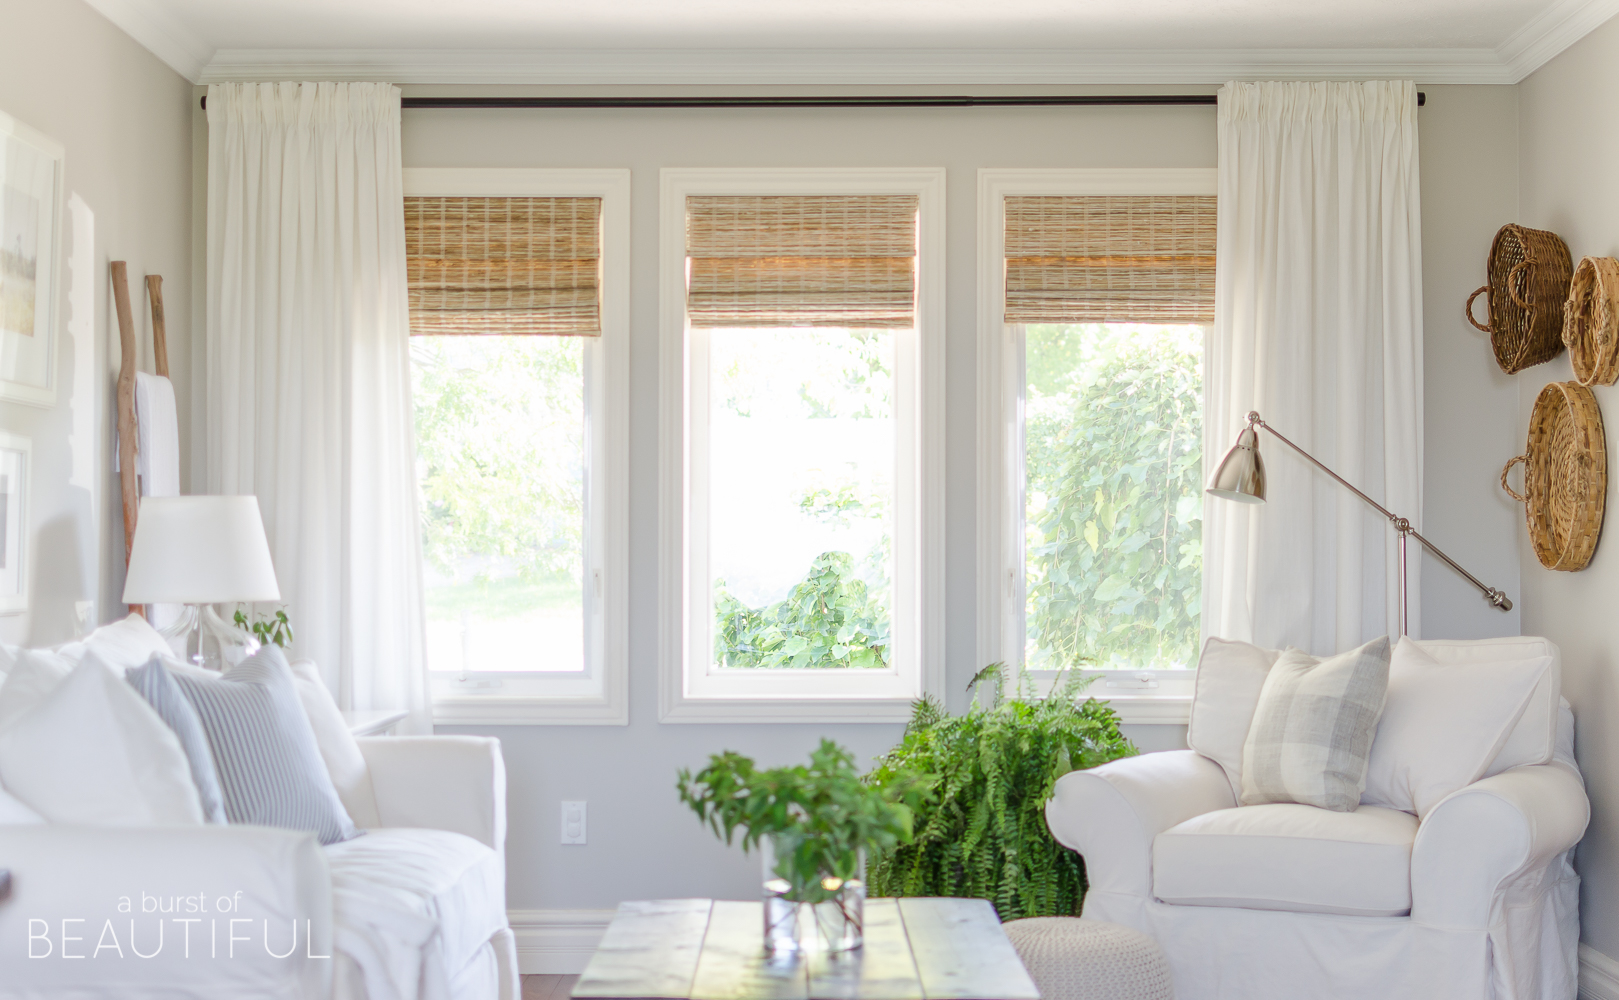 woven wood shades in our living room - a burst of beautiful